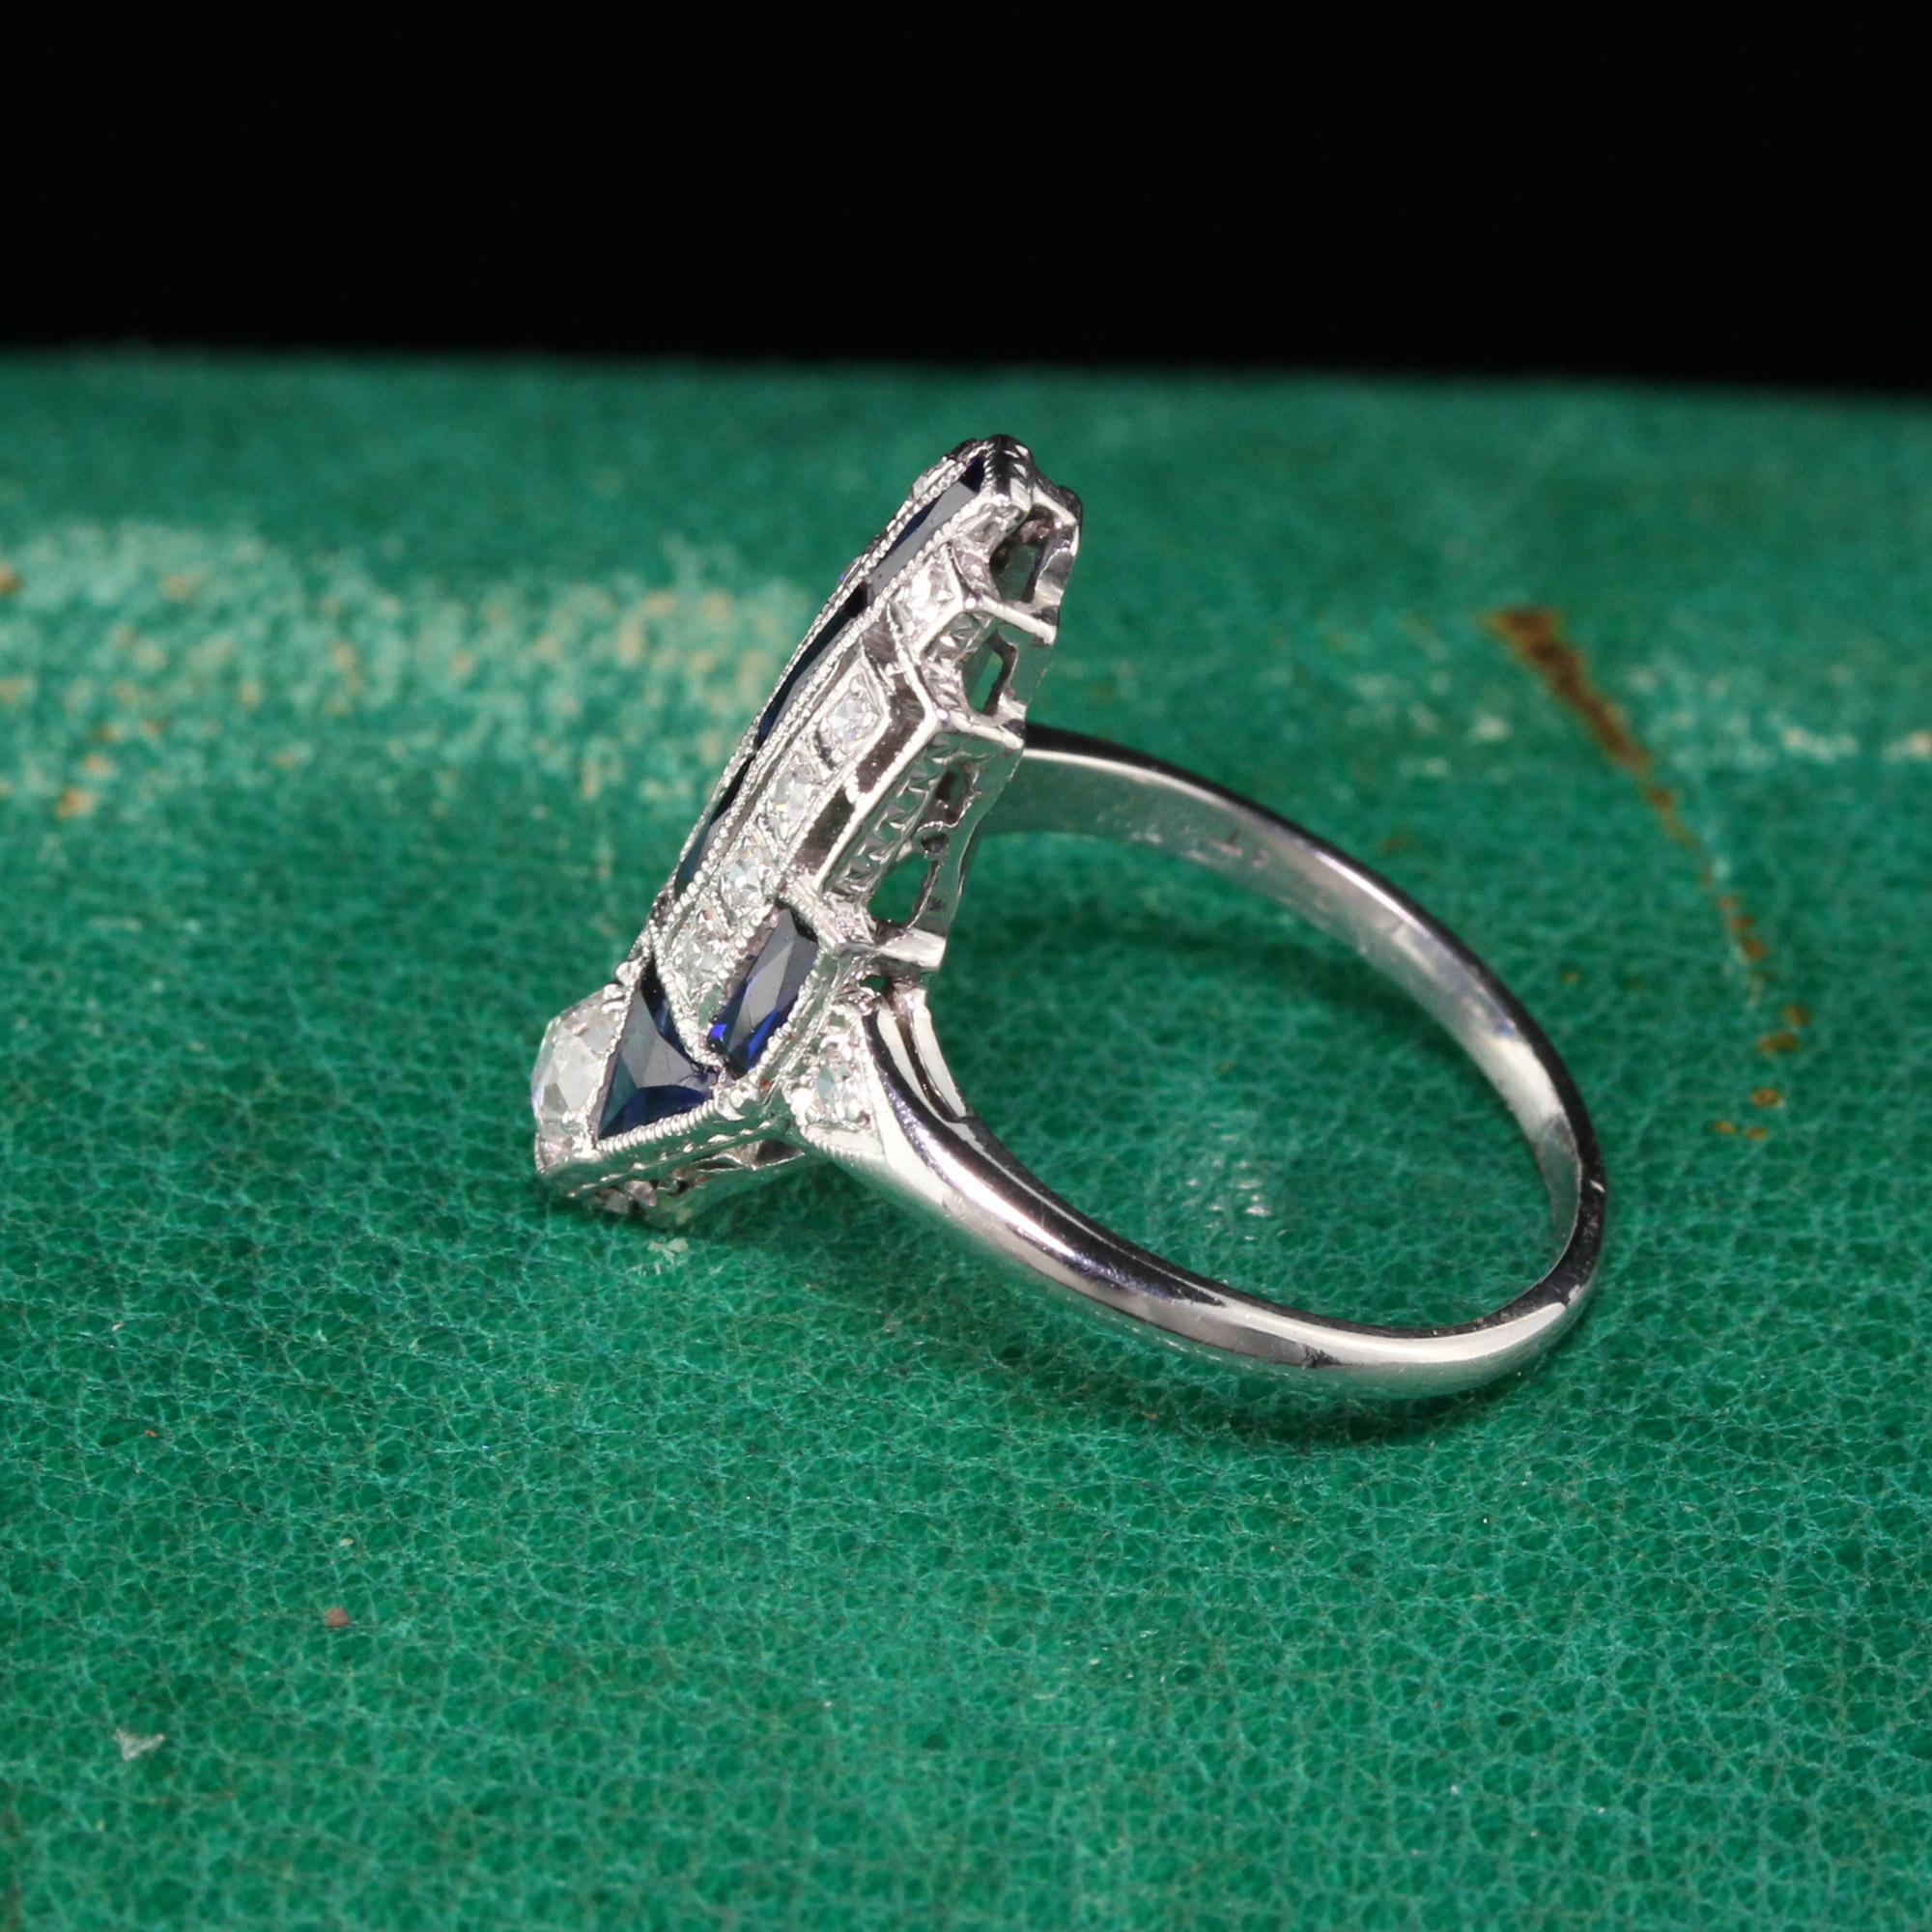 Beautiful Antique Art Deco Platinum Old European Diamond and Sapphire Ring. This beautiful ring features old european cut diamonds and synthetic sapphires in an egyptian revival design. Truly a unique and amazing piece! 

Item #R0615

Metal: